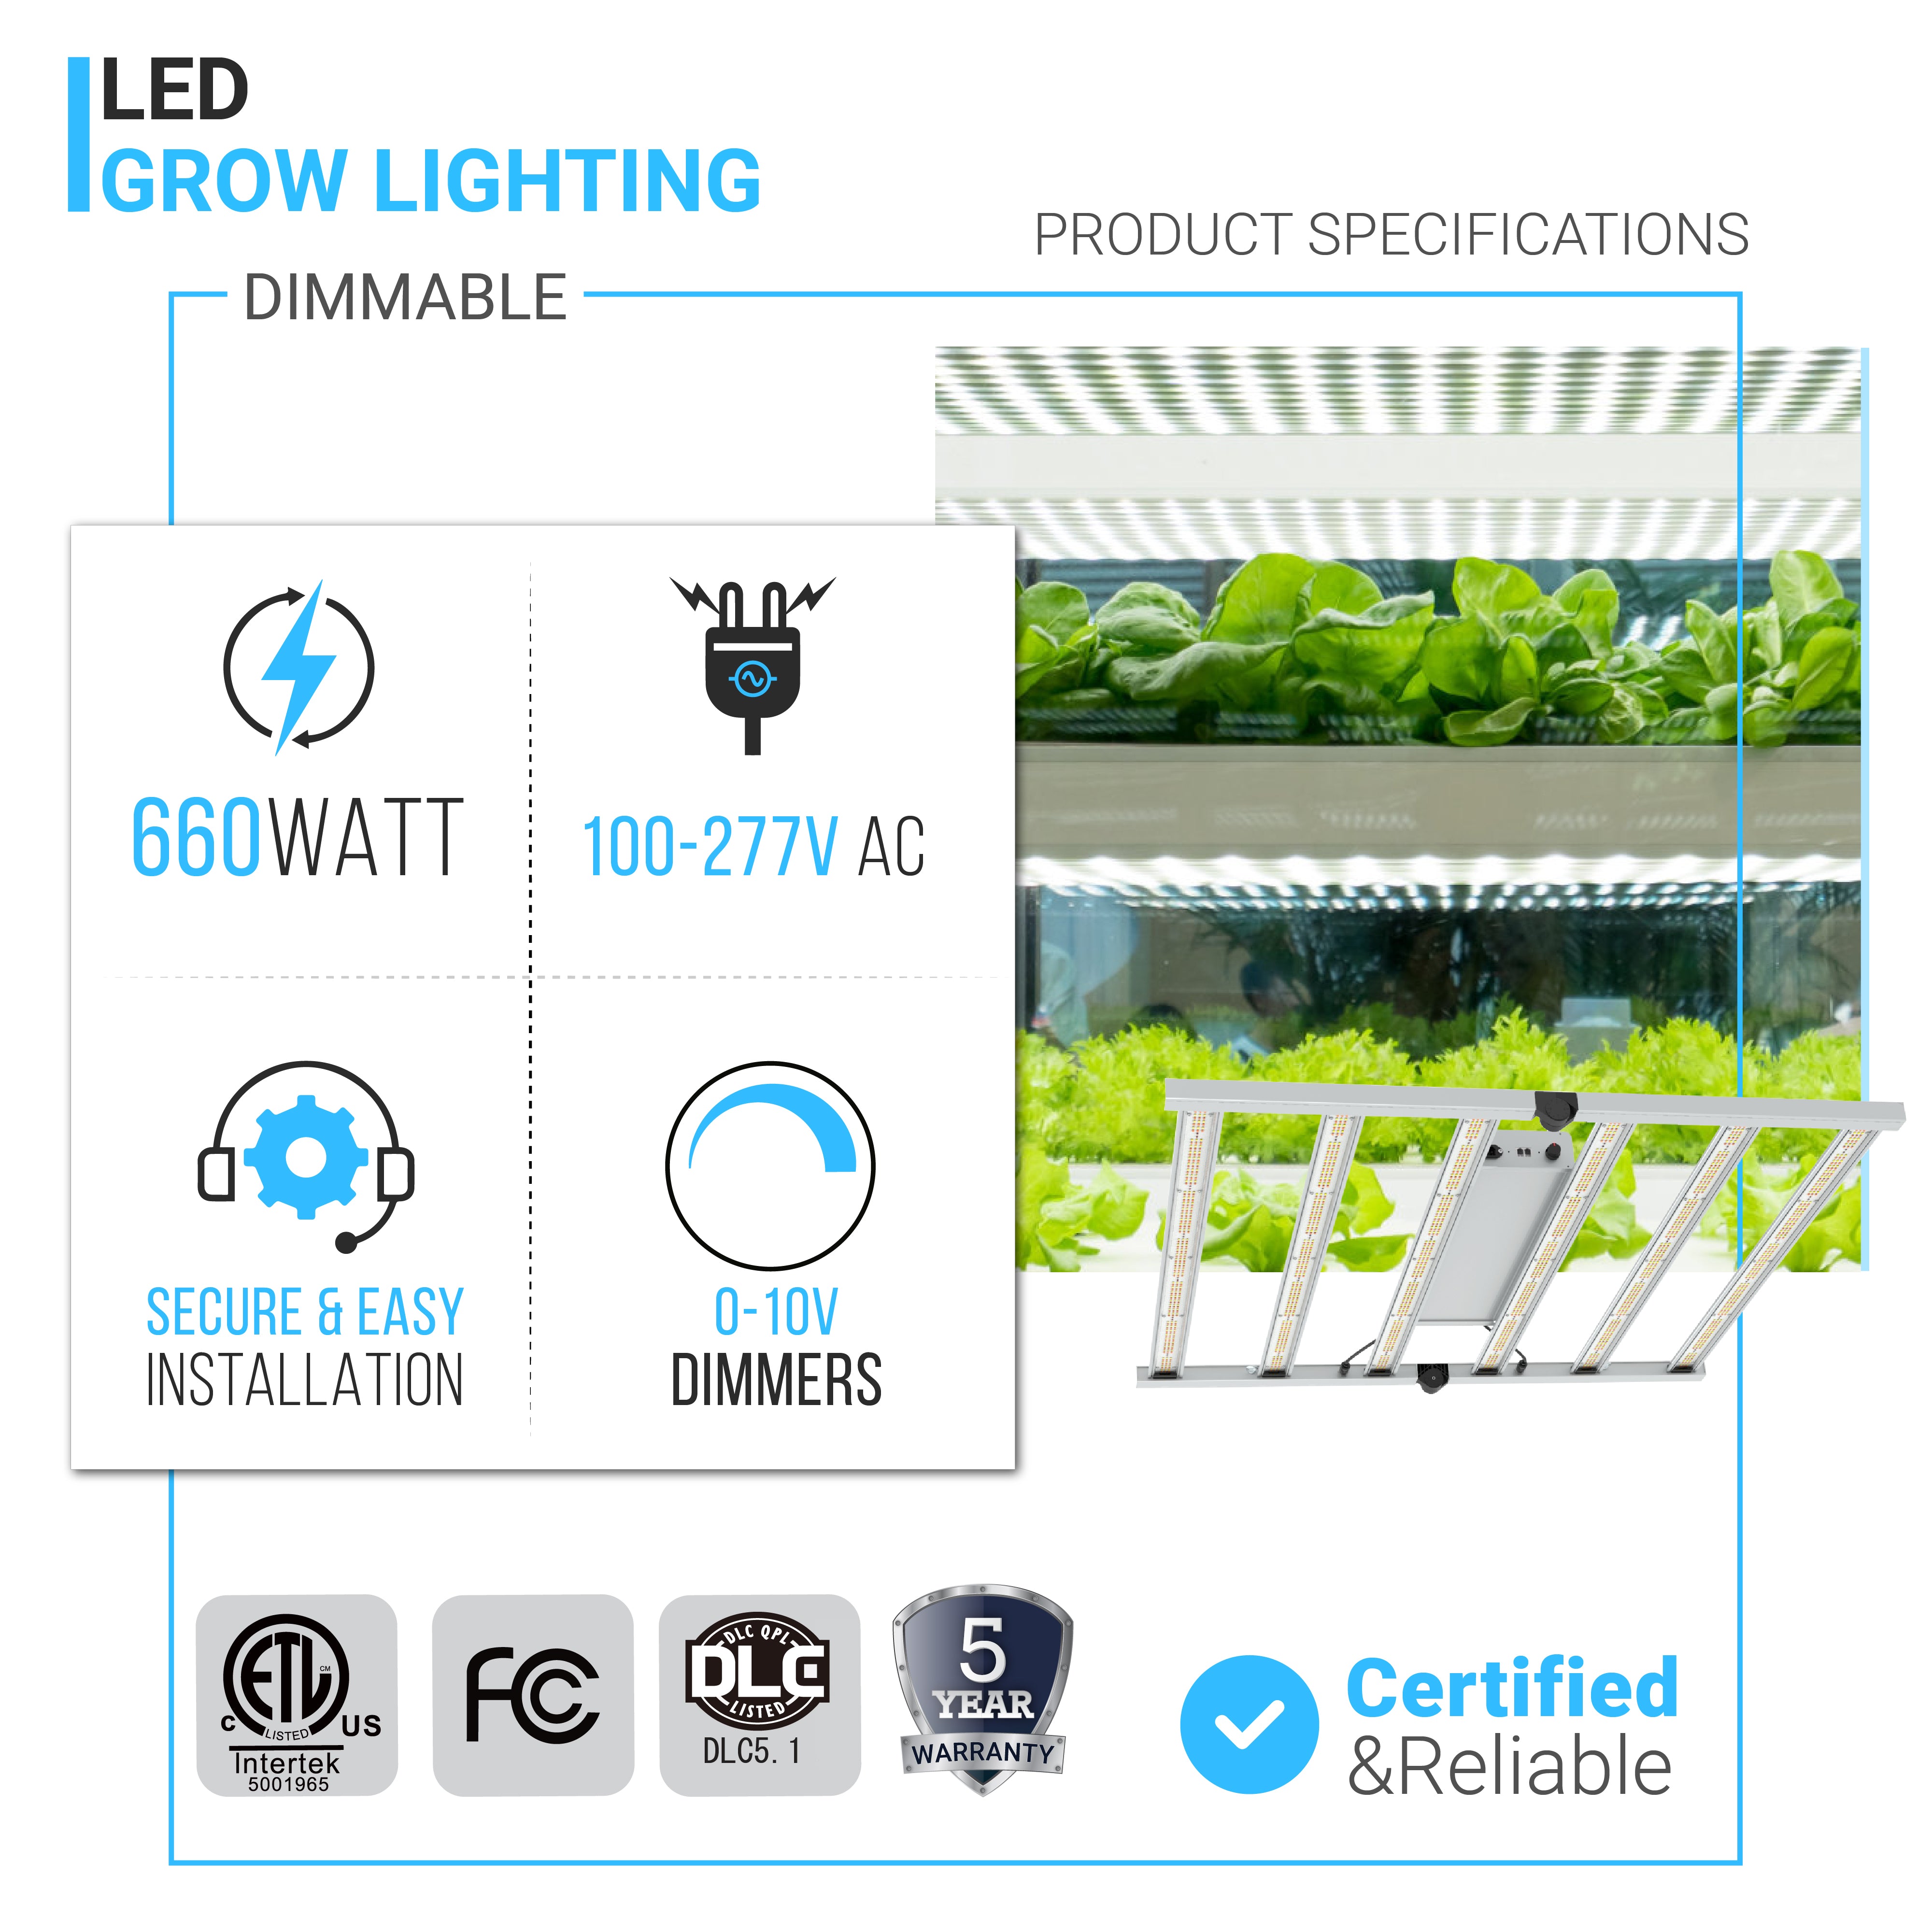 660W Led Grow Light, 100-277 V, 2.8µmol/j, Dimmable, Commercial Led Plant Lights for Indoor Hydroponics Greenhouse Plants Veg and Bloom